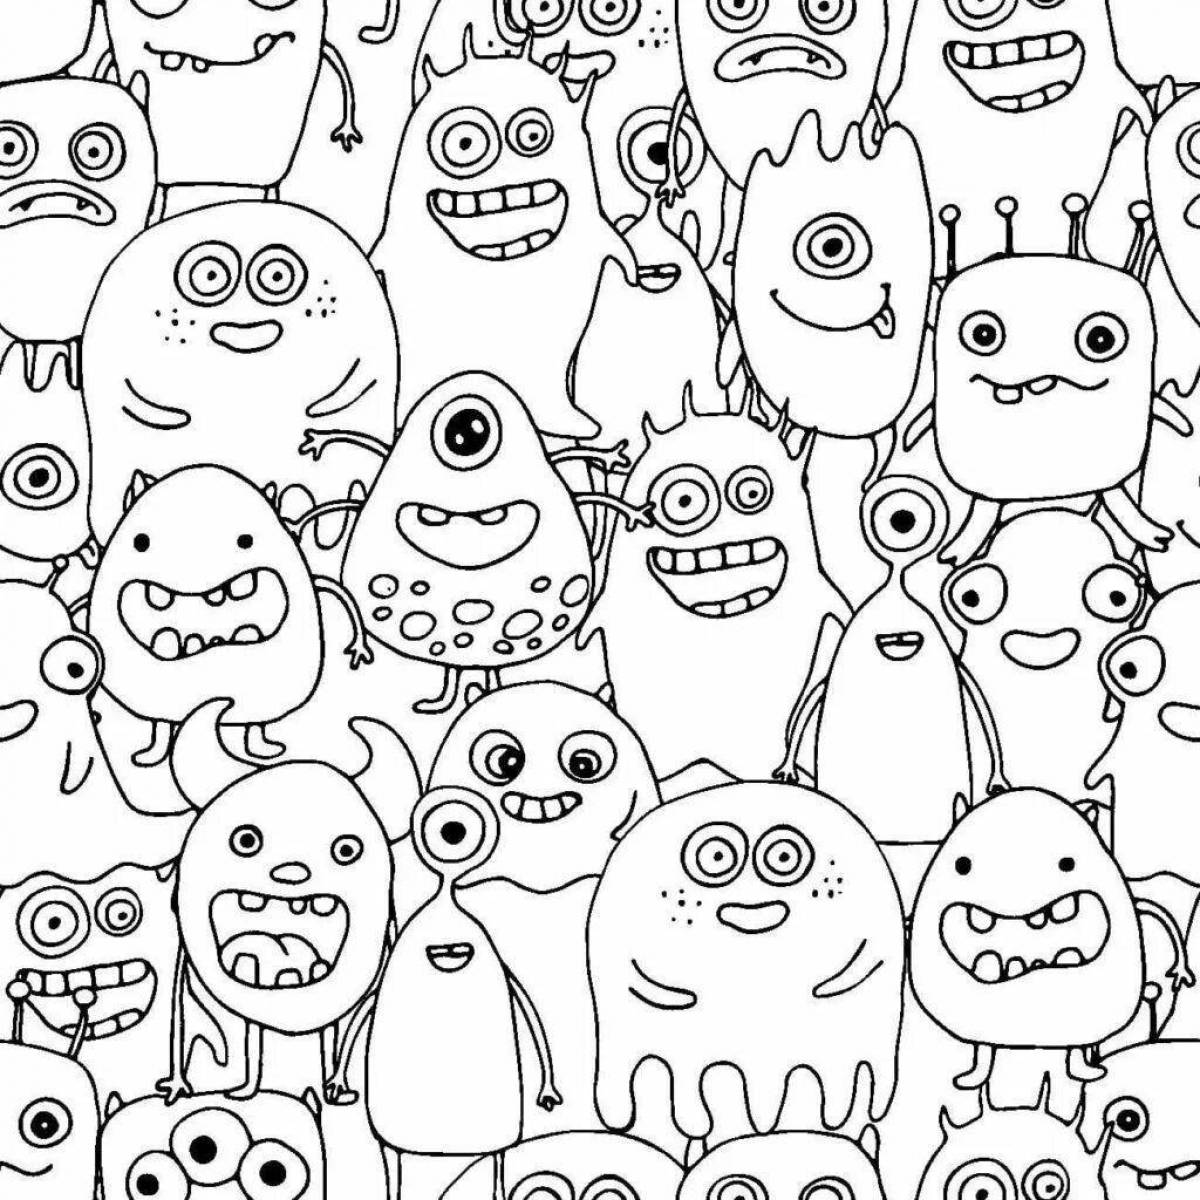 Coloring page dazzling rainbow monsters